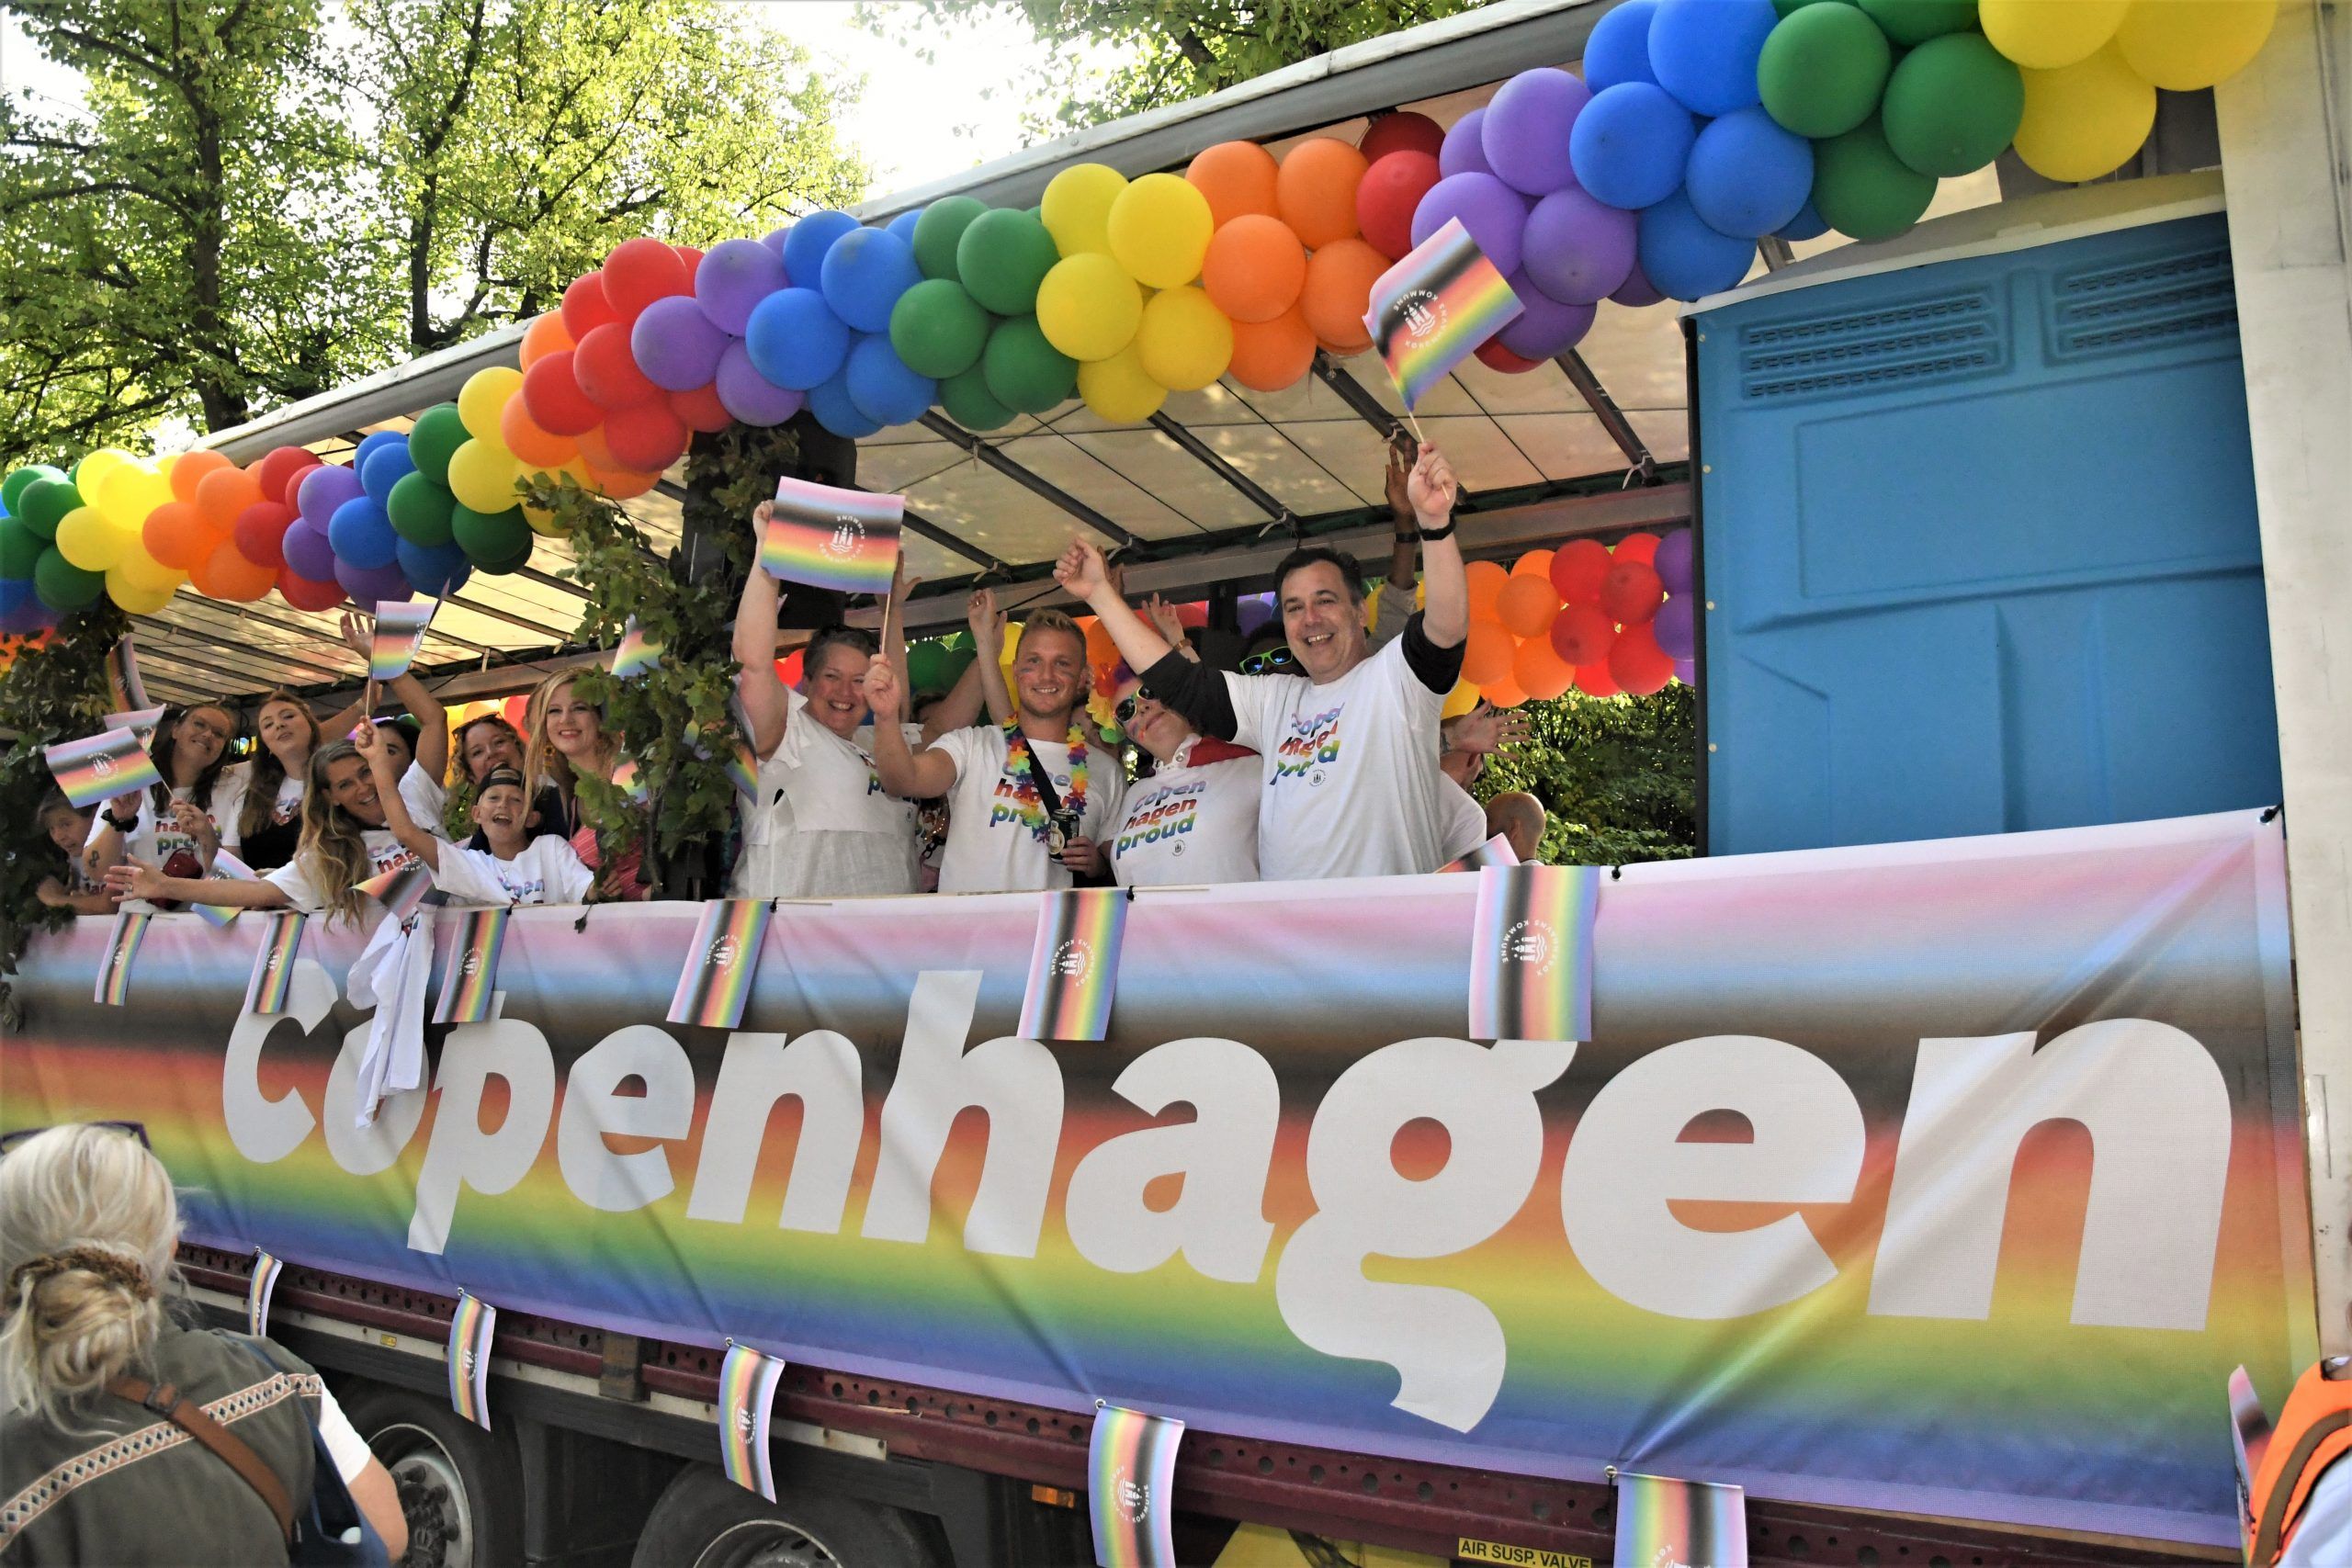 About Town: Back with a vengeance at Copenhagen Pride!